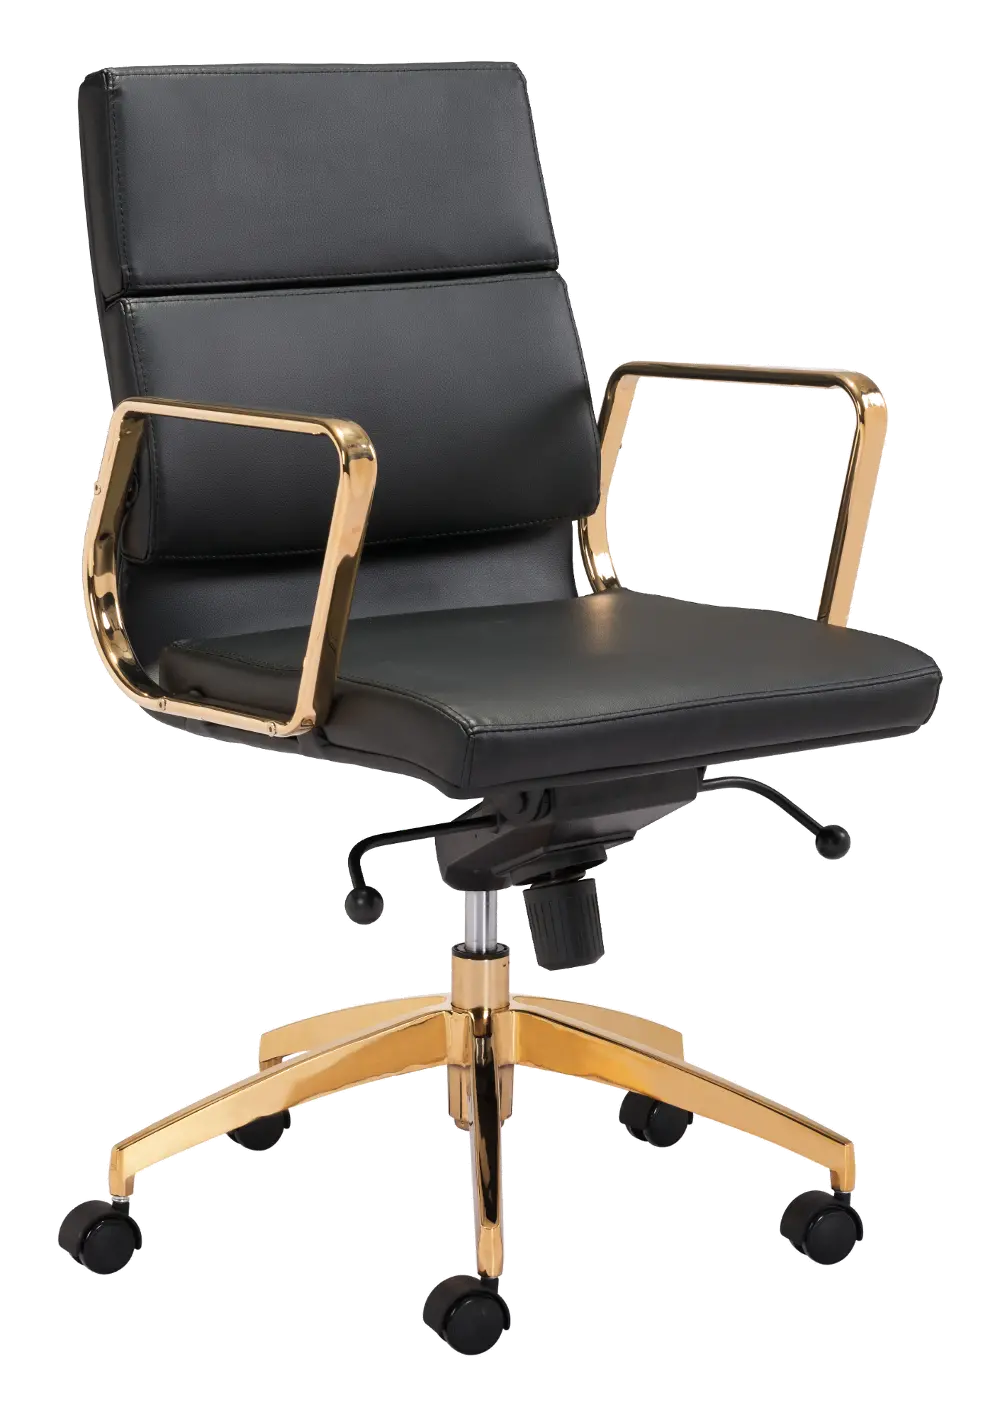 Sleek and Sassy Black and Gold Office Chair - Scientist-1